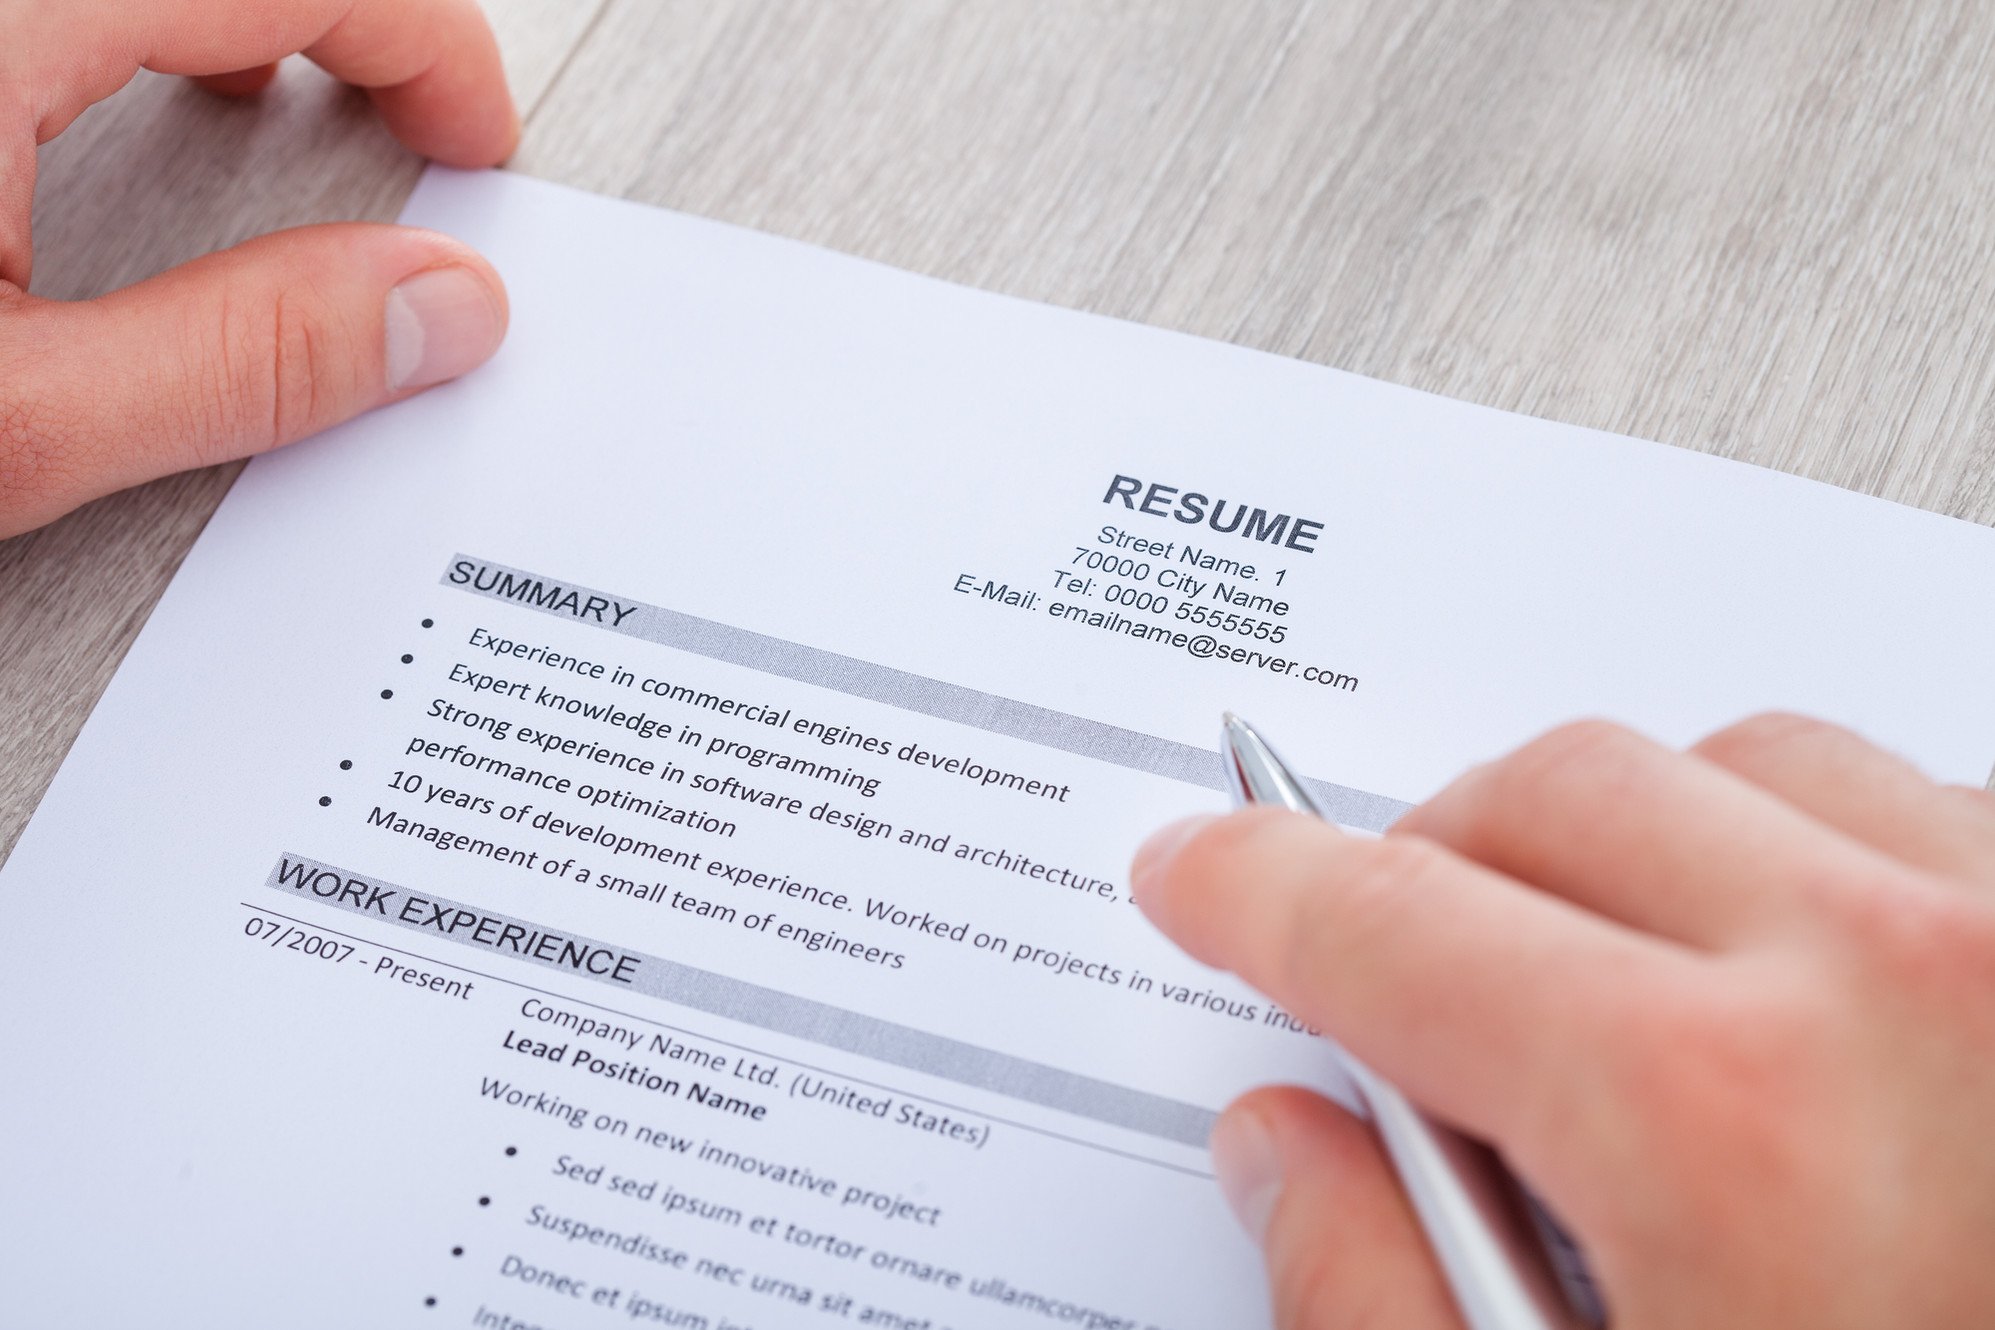 4 Things You Should Include on Your Resume